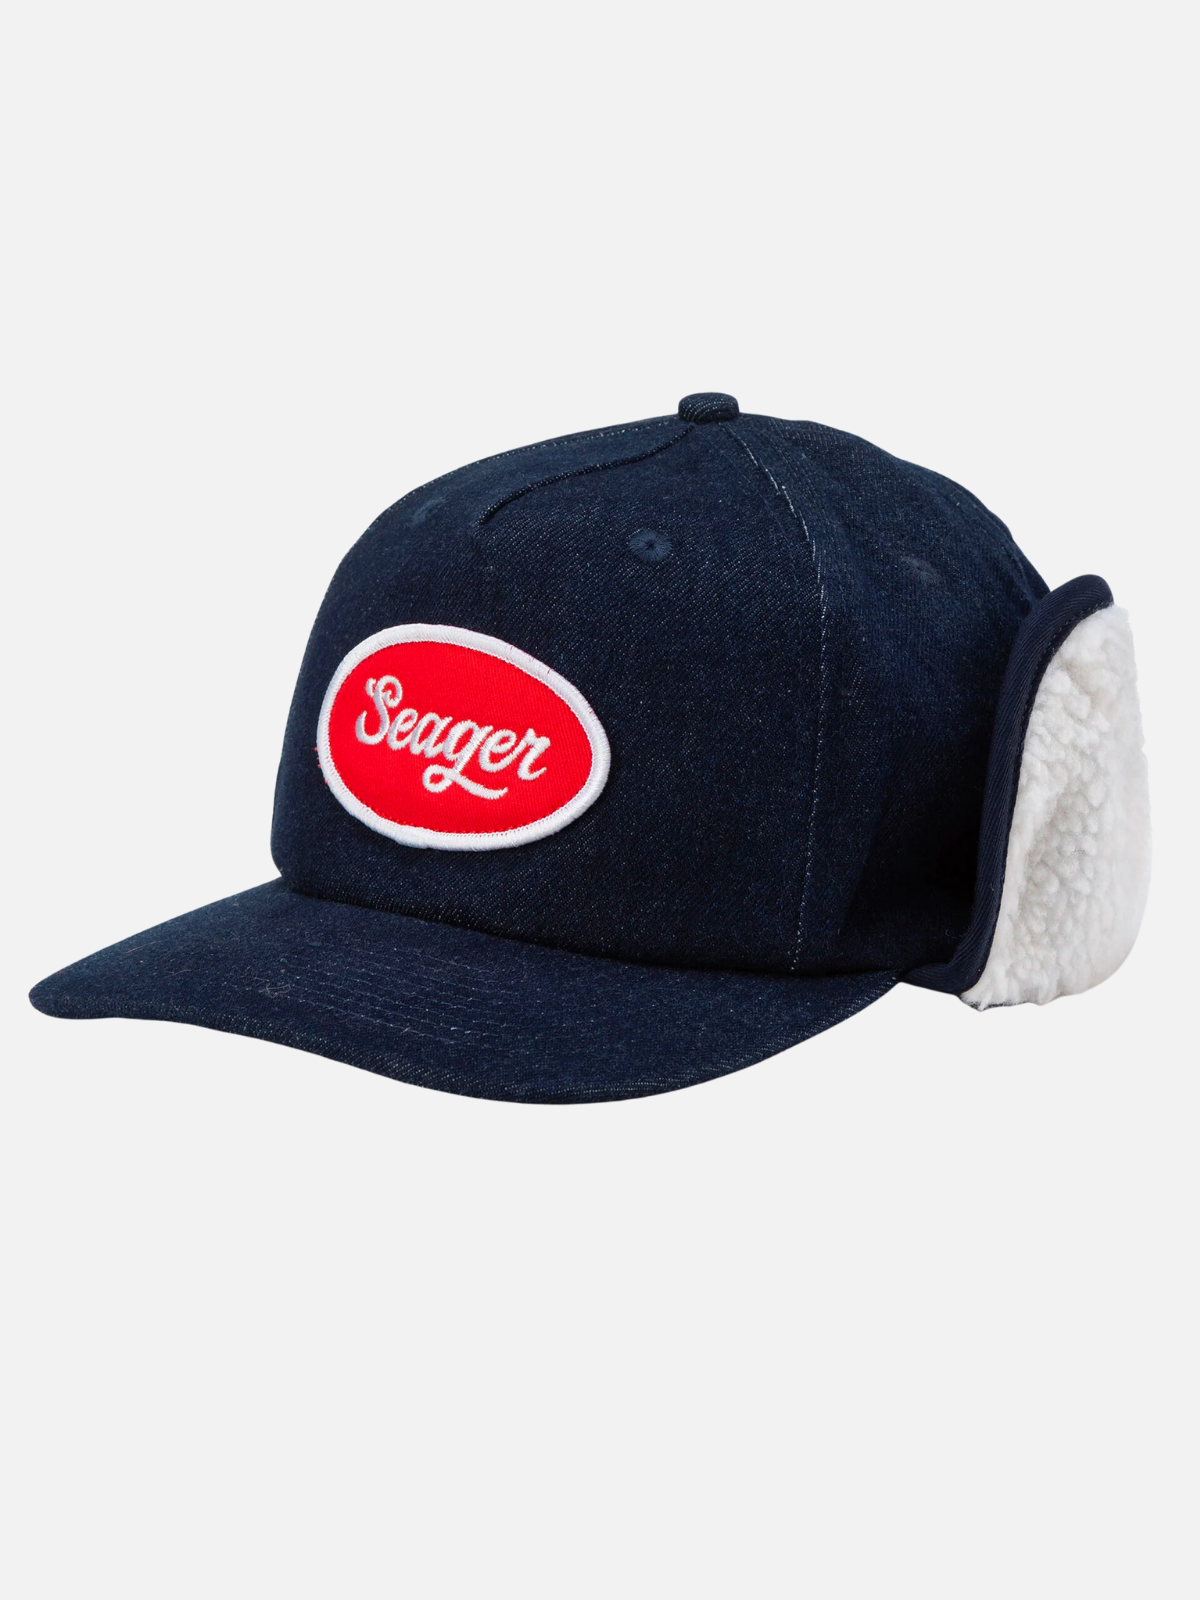 seager russ denim flapjack indigo blue red white brand patch ethically sourced organic sherpa kempt athens ga georgia men's clothing store hats